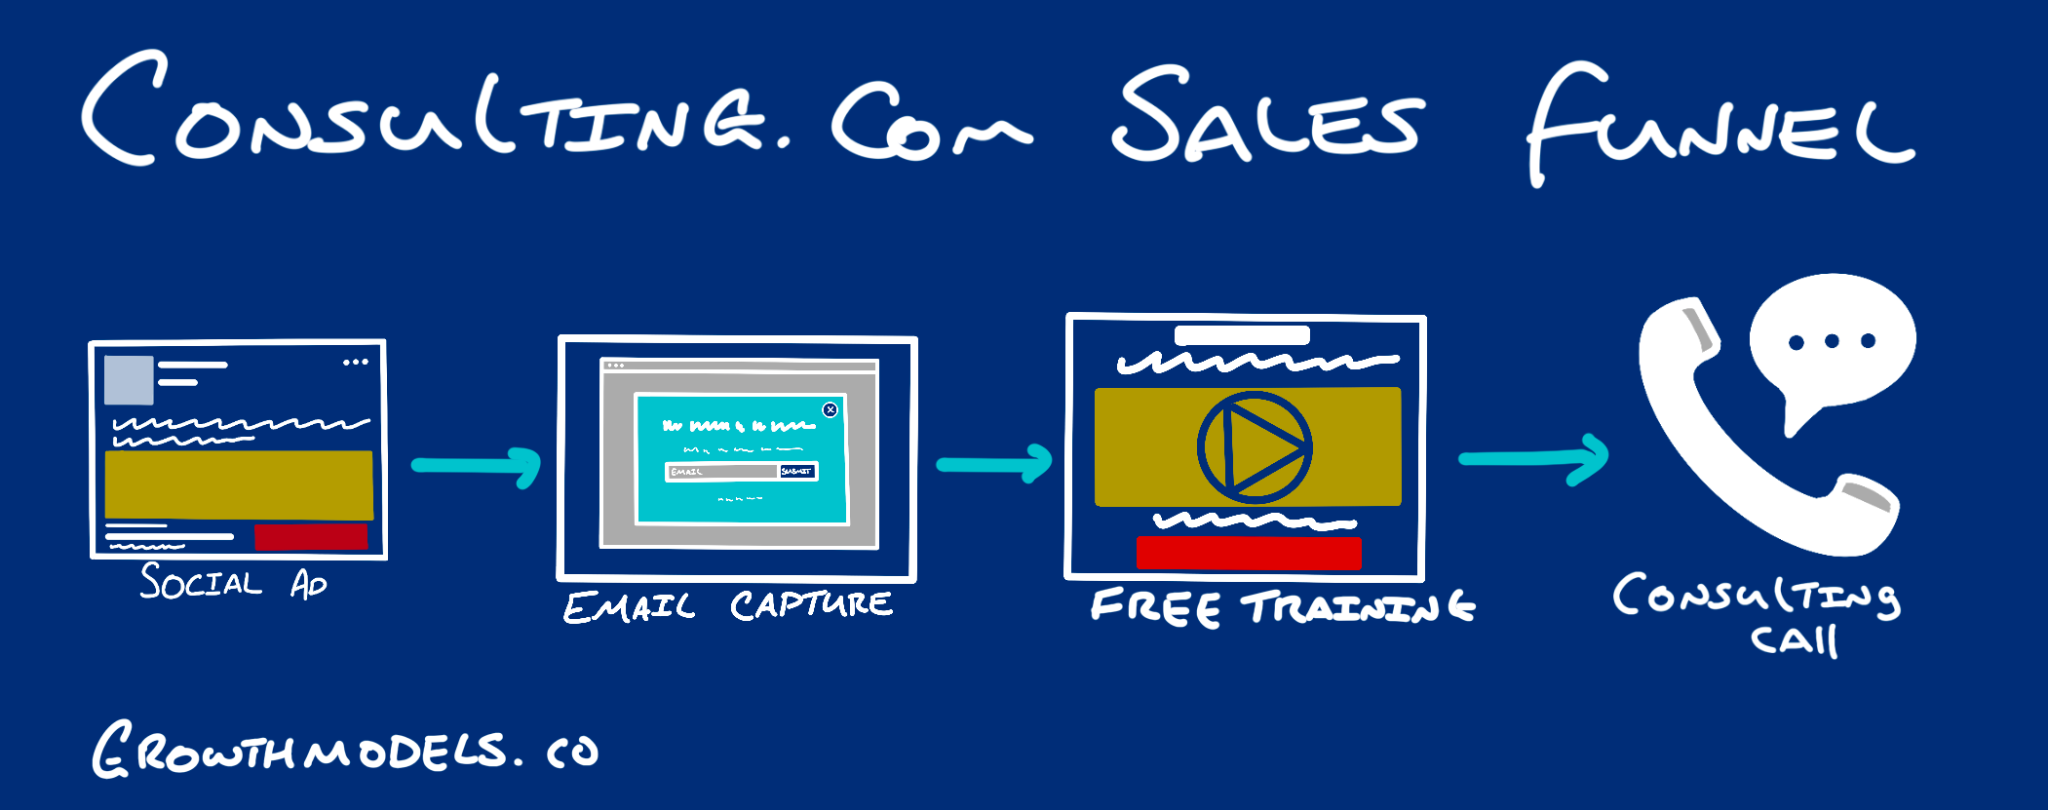 Consulting.com sales funnel for sam ovens